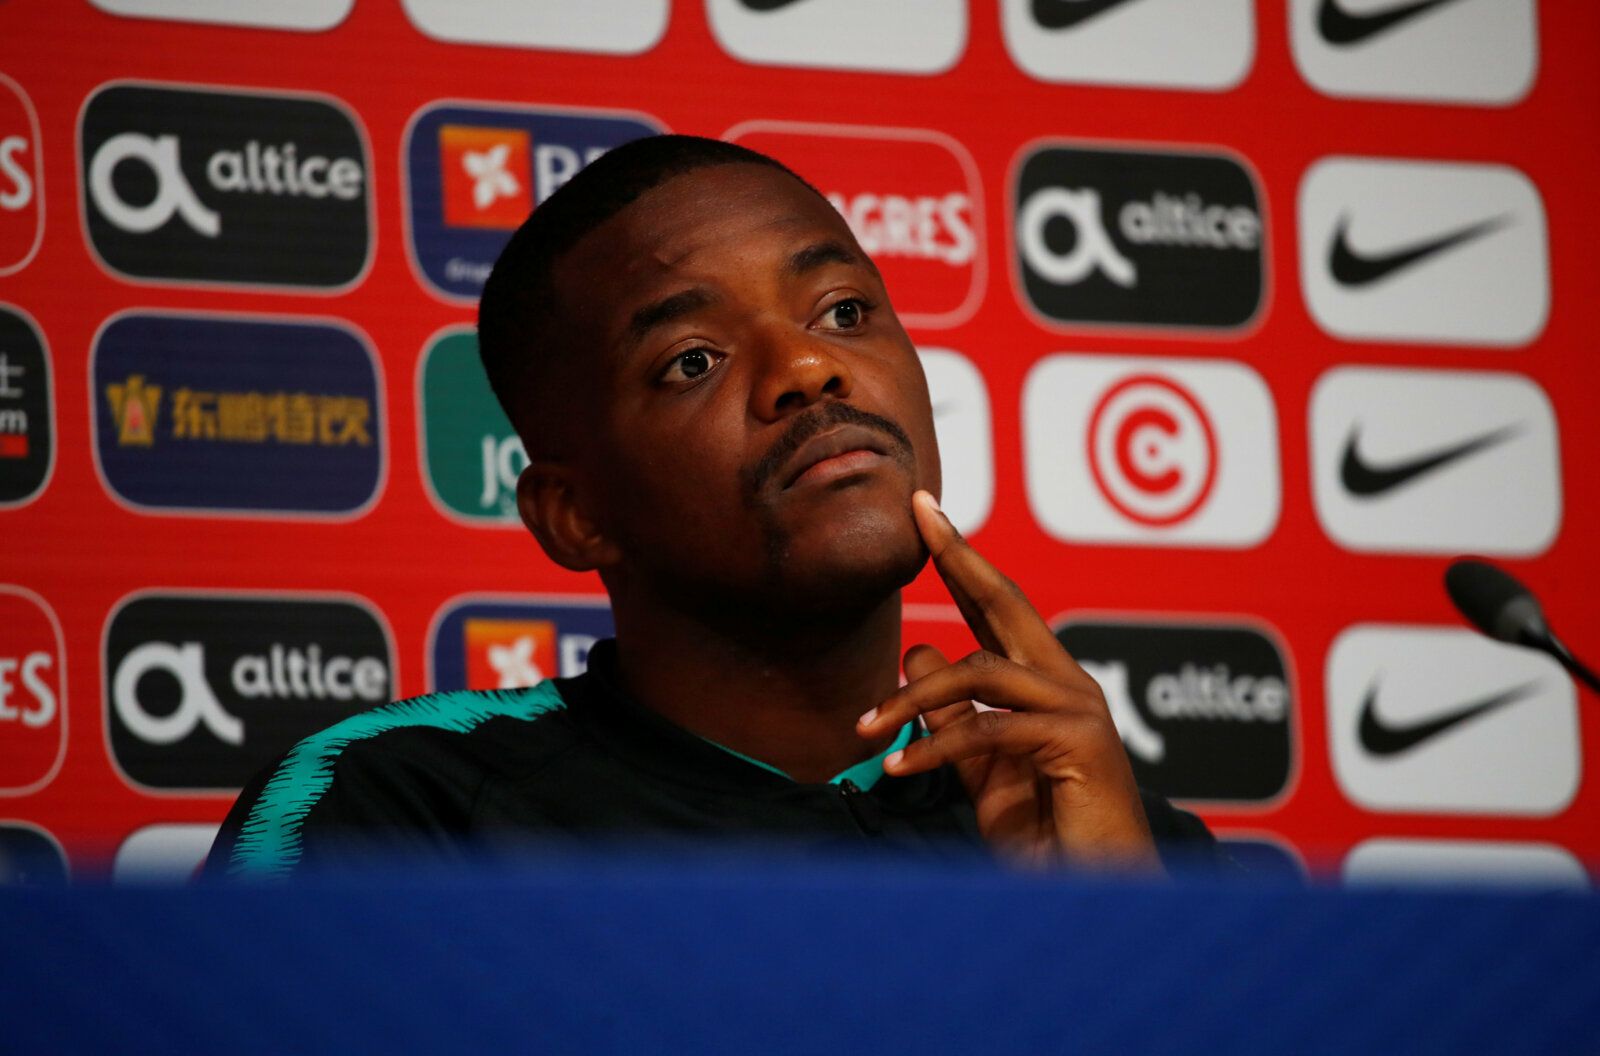 Soccer Football - UEFA Nations League - Portugal Press Conference - San Siro, Milan, Italy - November 16, 2018   Portugal's William Carvalho during the press conference    REUTERS/Alessandro Garofalo